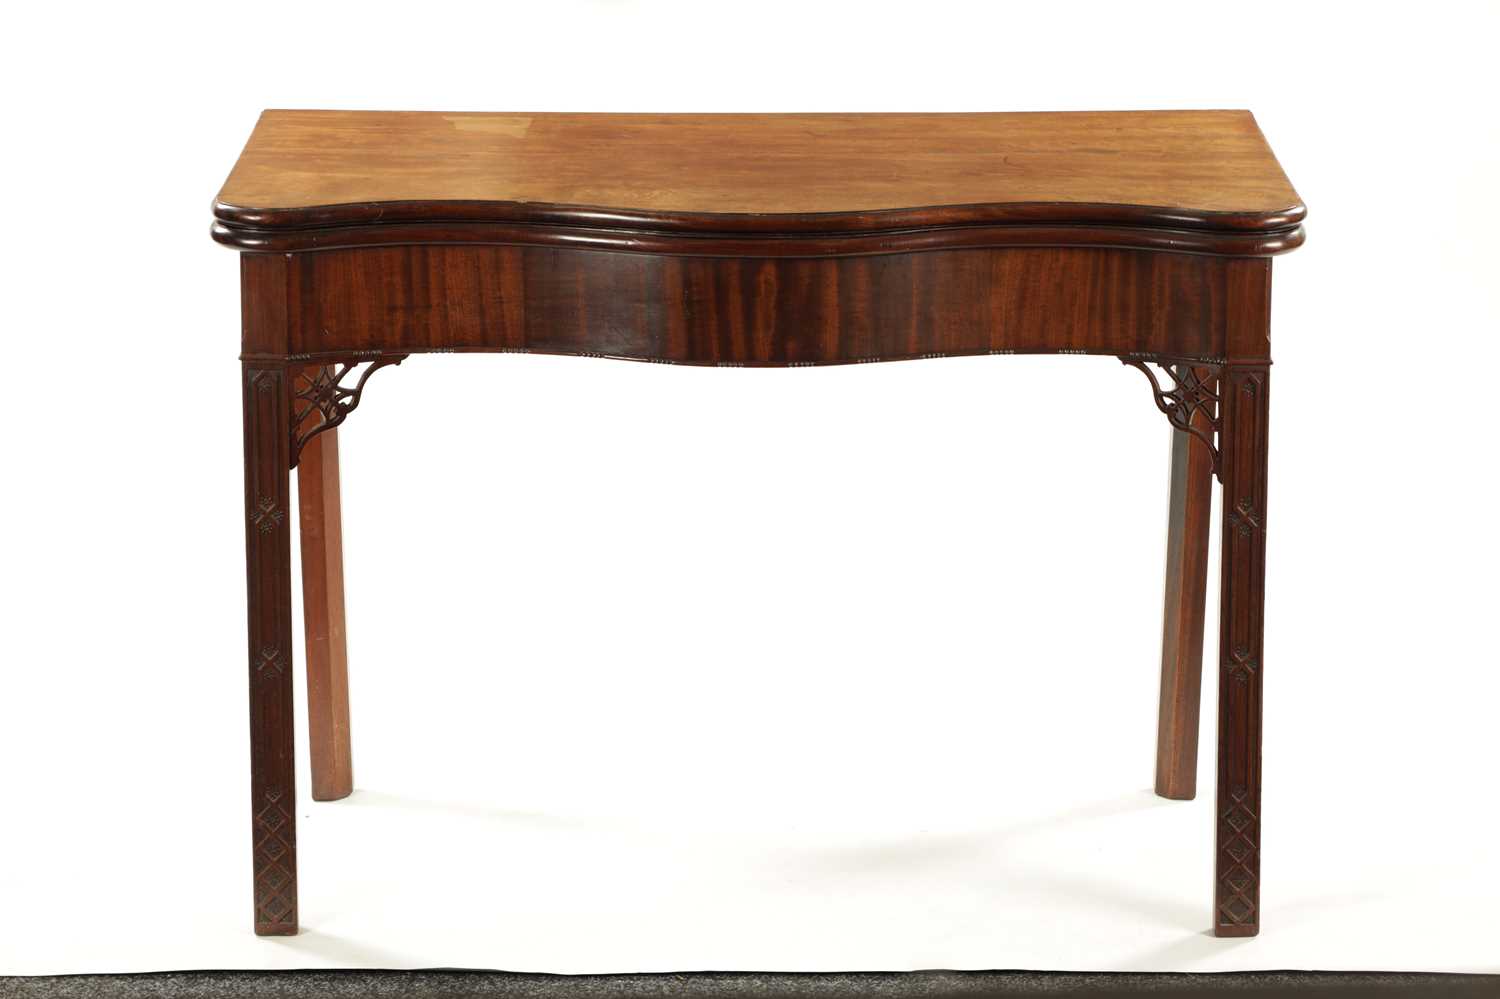 A FINE OVERSIZED GEROGE III SERPENTINE MAHOGANY TEA-TABLE IN THE MANNER OF THOMAS CHIPPENDALE - Image 2 of 8